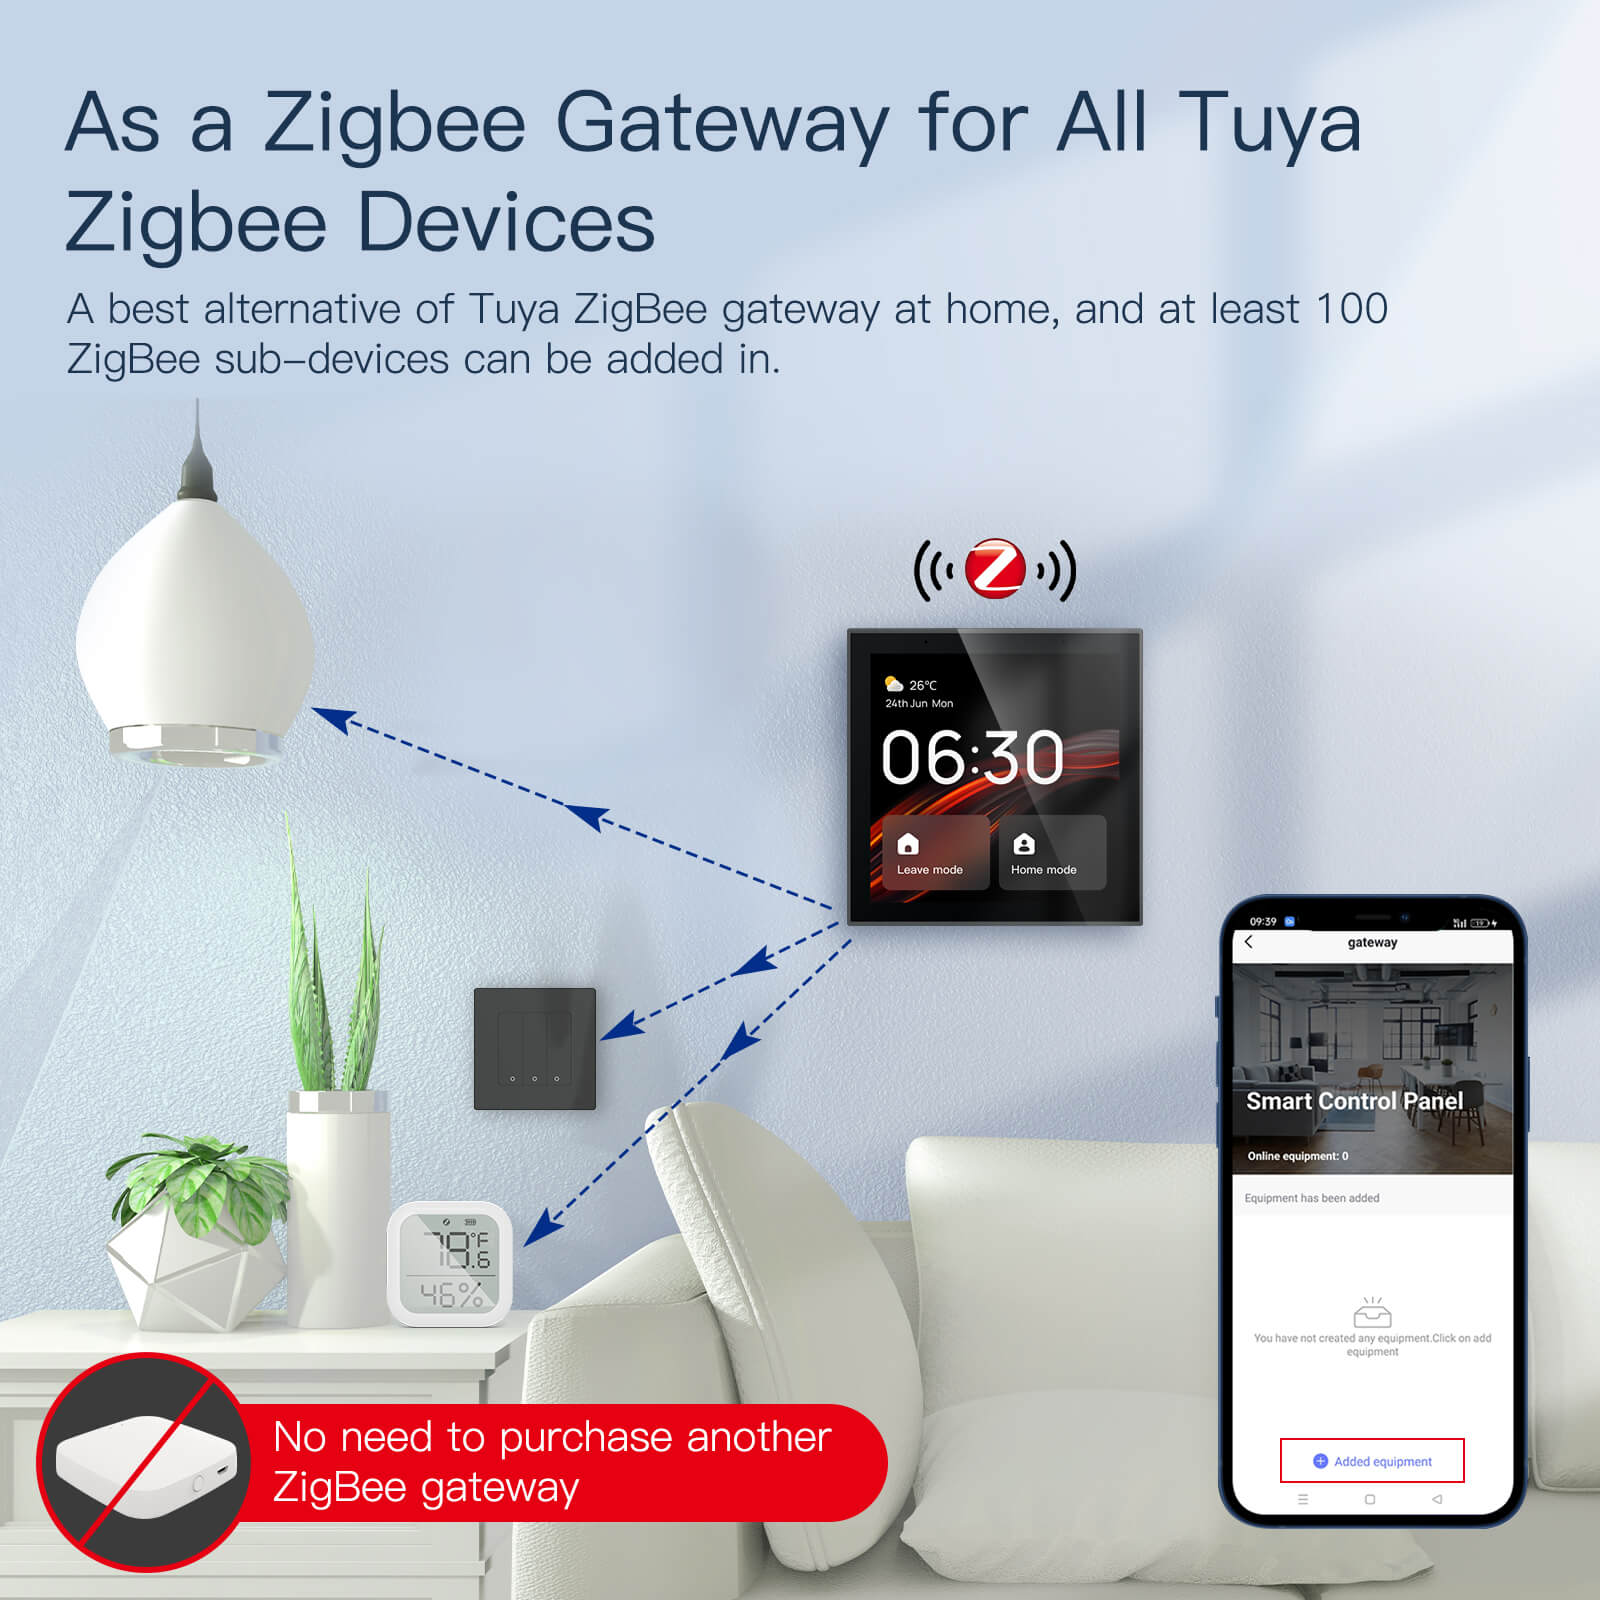 A best alternative of Tuya ZigBee gateway at home, and at least 100 ZigBee sub-devices can be added in. - MOES